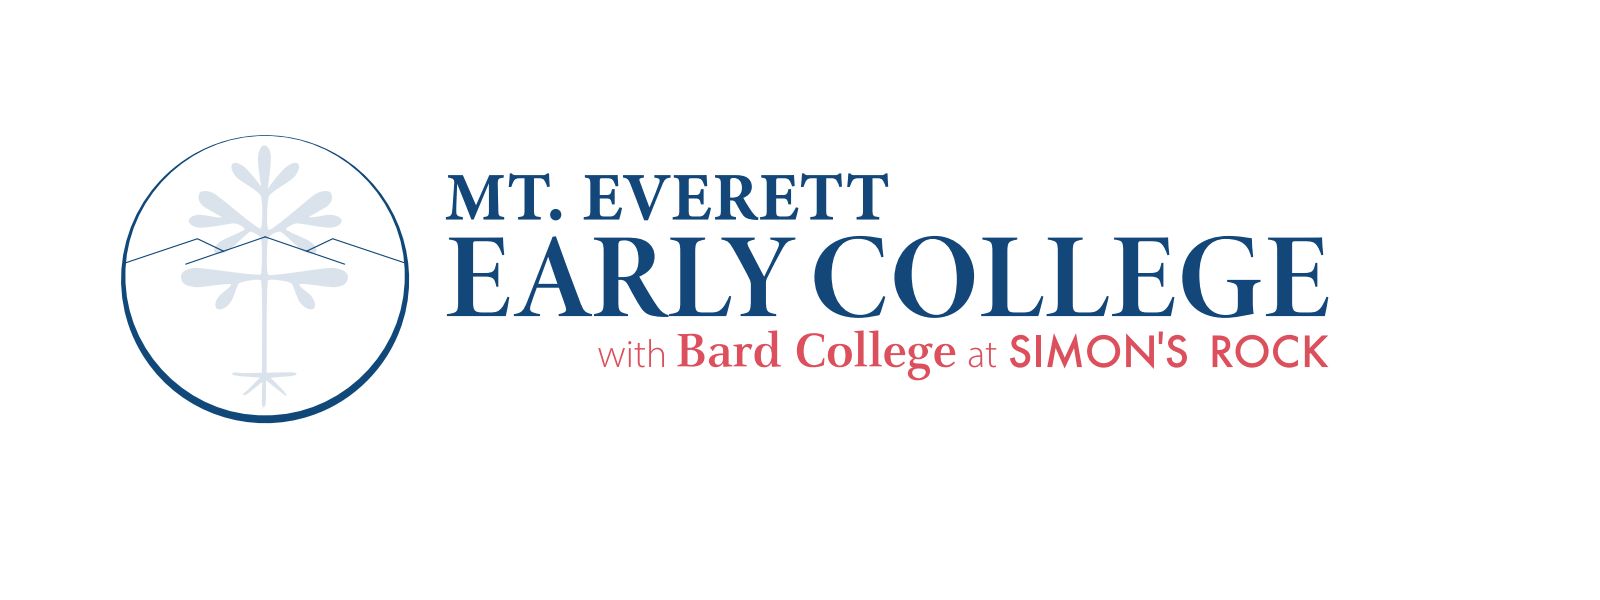 Early College Logo